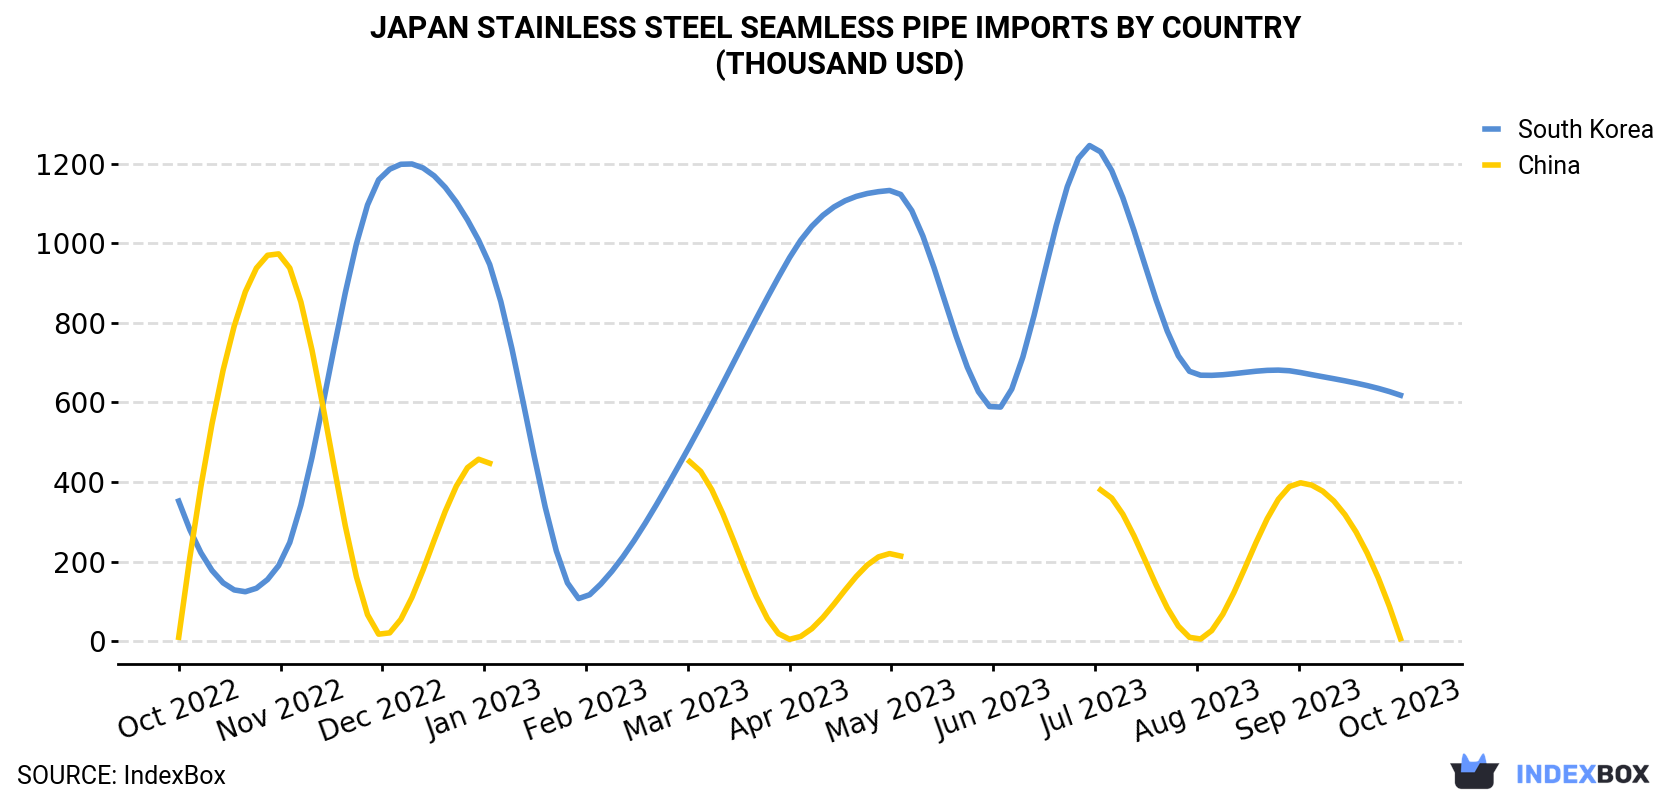 Japan Stainless Steel Seamless Pipe Imports By Country (Thousand USD)